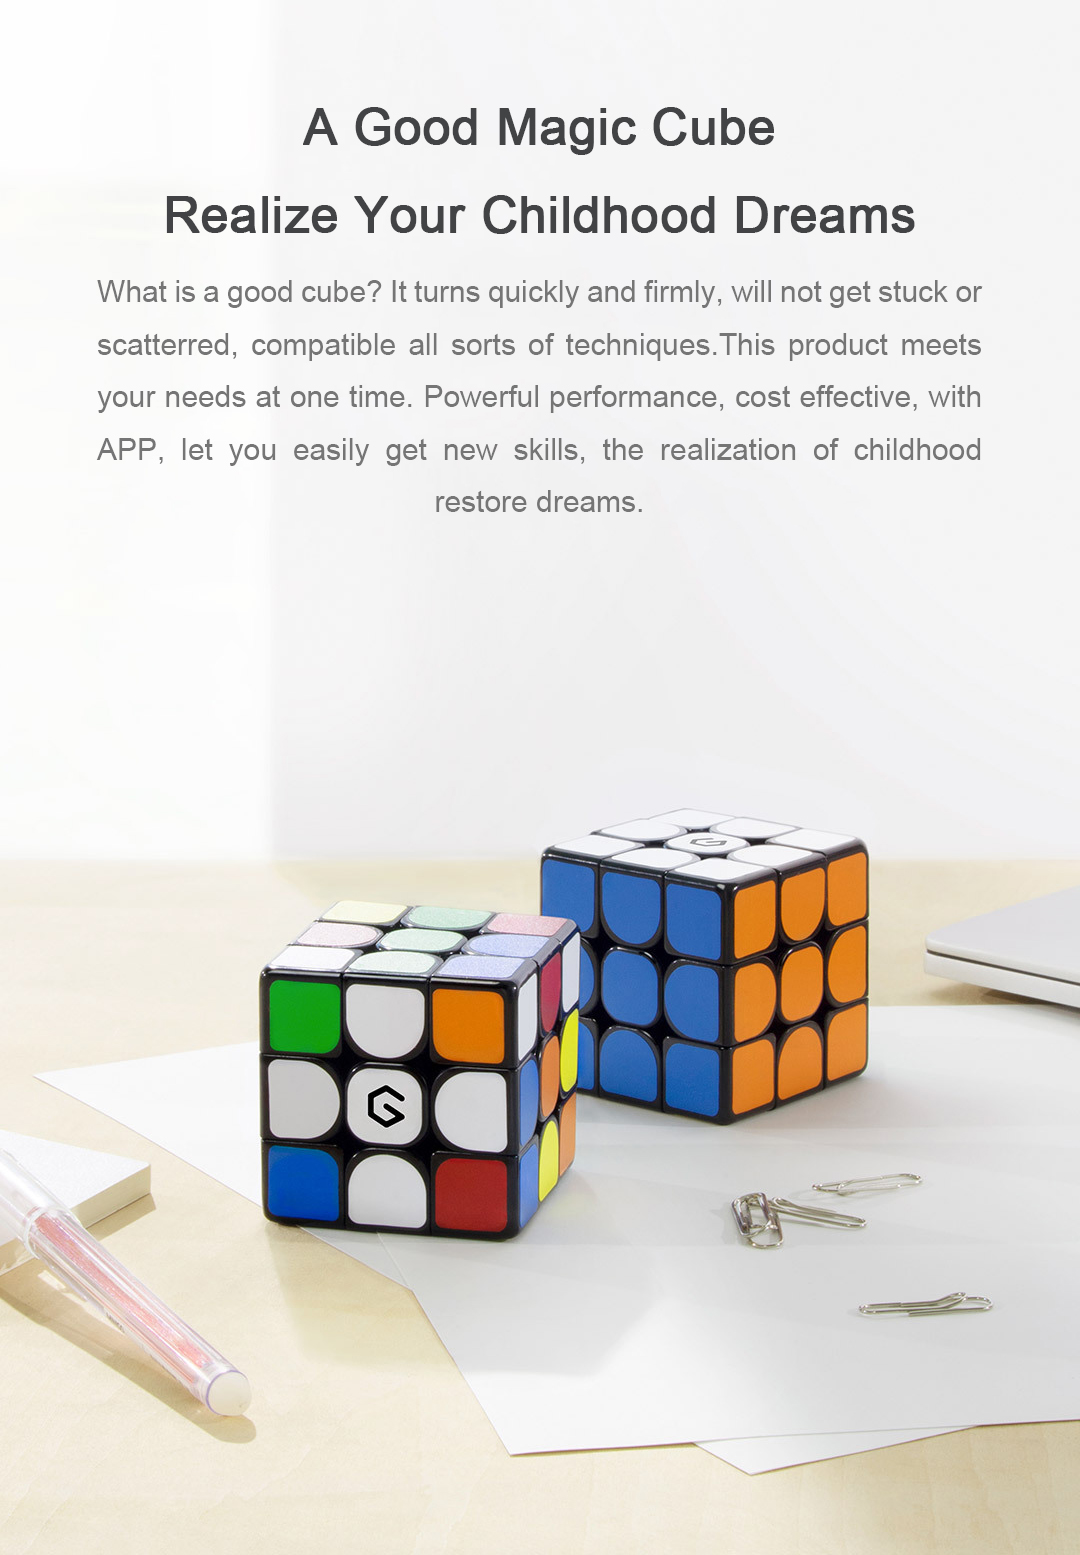 Xiaomi Giiker M3 Magnetic Cube 3x3x3 Vivid Color Square Magic Cube Puzzle Science Education Toy Gift 14